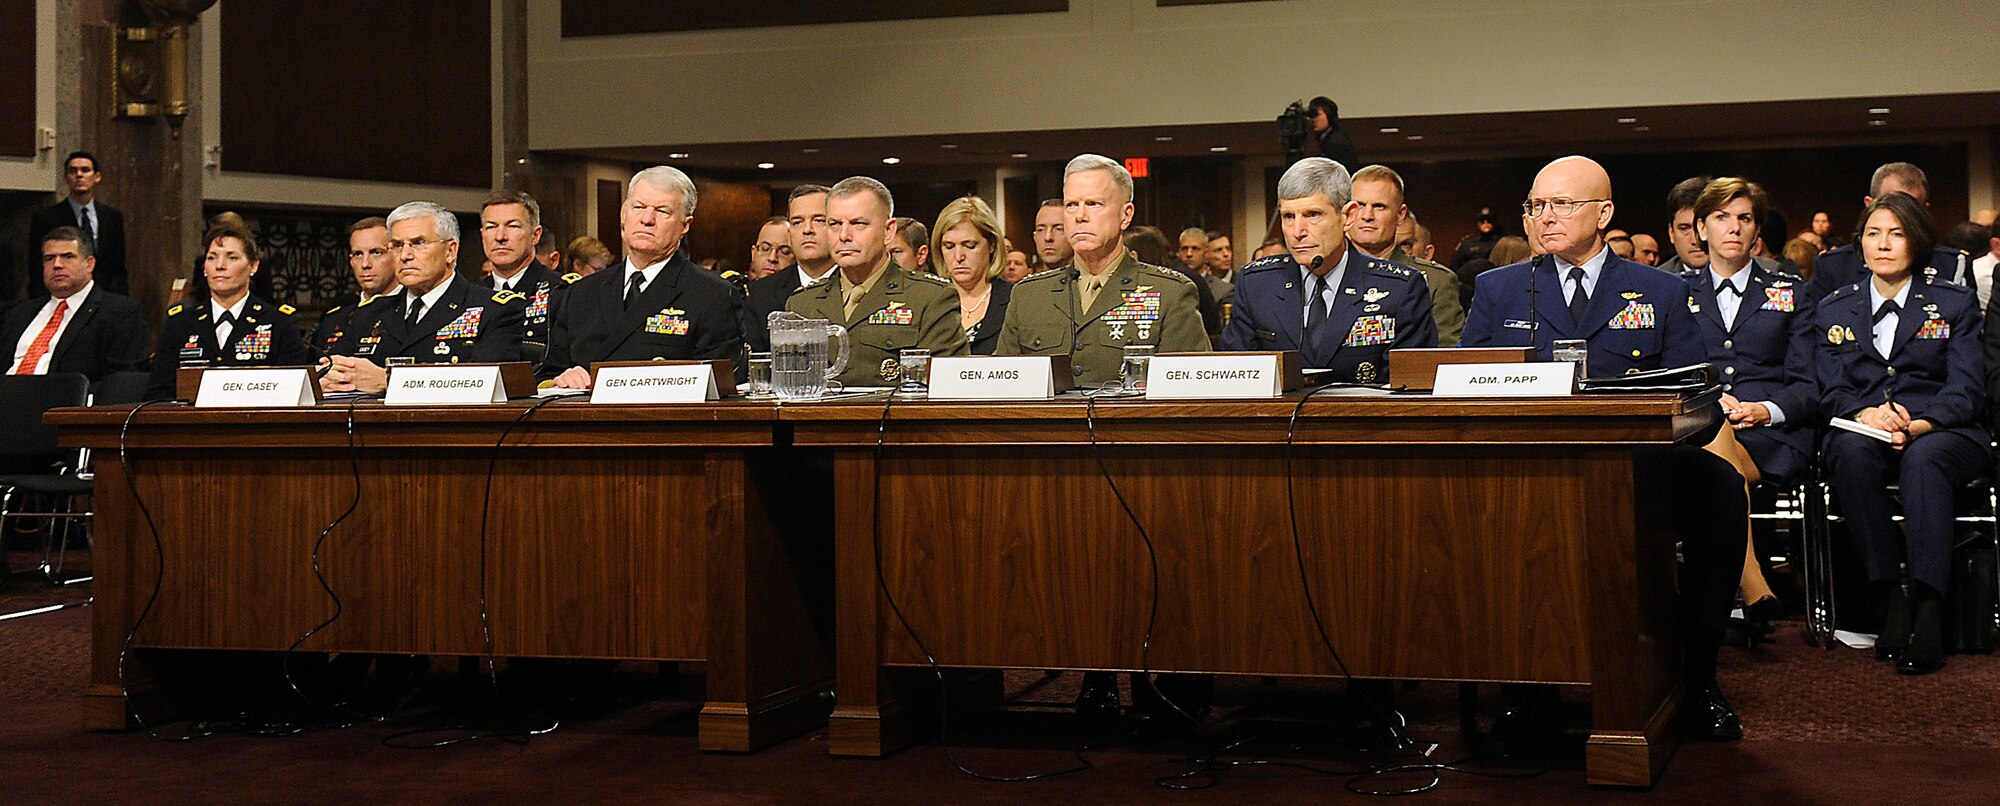 Air Force Chief of Staff Gen. Norton Schwartz and other senior military leaders testify before the Senate Armed Services Committee Dec. 3, 2010, in Washington, D.C. General Schwartz, his fellow service chiefs and the vice chairman of the Joint Chiefs of Staff testified on the recently released Comprehensive Review Working Group report, which addresses the potential repeal of the "Don't Ask, Don't Tell" law. (U.S. Air Force photo/Scott M. Ash)